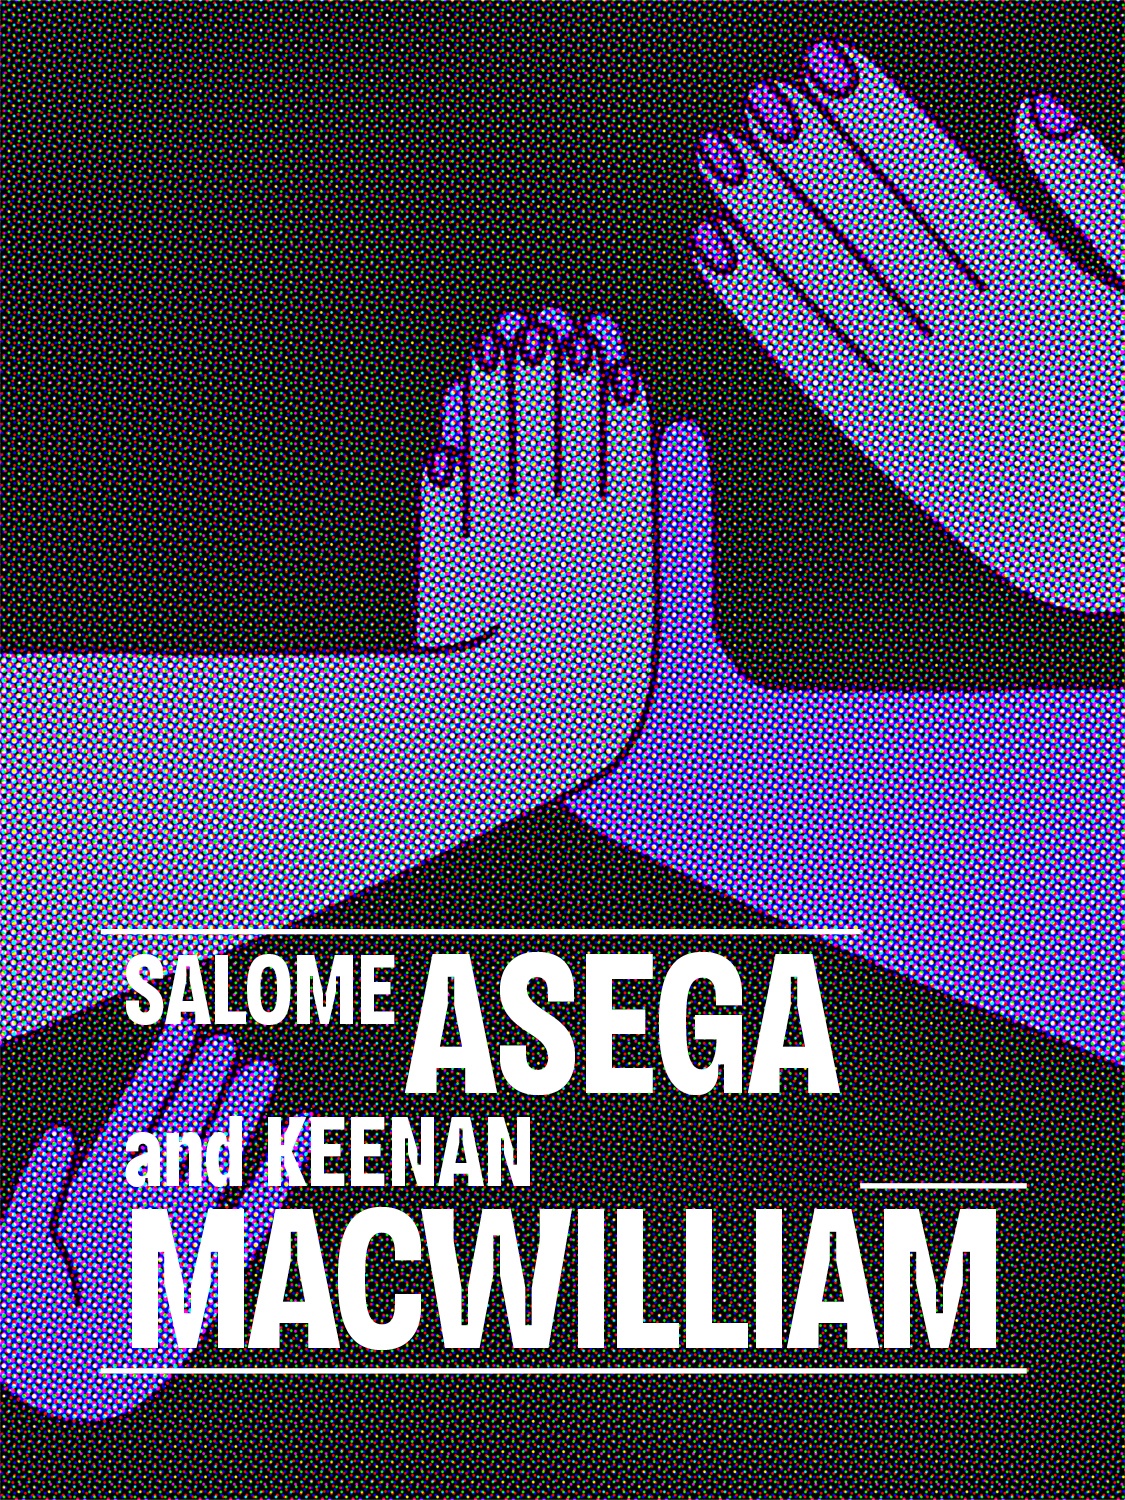 Purple cartoon hands clapping with the names Salome Asega and Keenan MacWilliam superimposed in white type